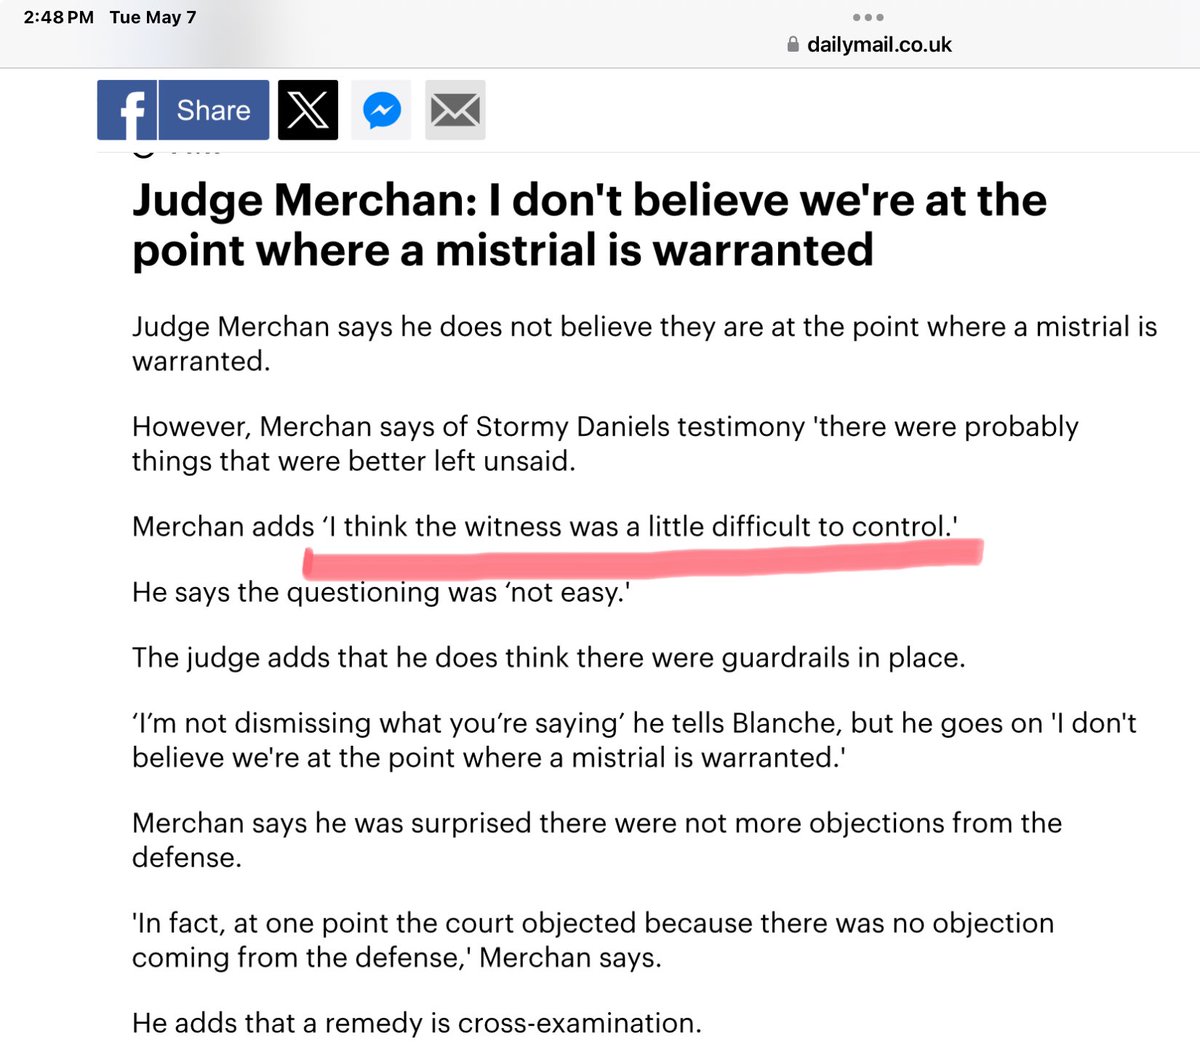 I taught evidence and I would flunk the judge on this one…the issue whether to grant mistrial is NOT whether witness difficult to control BUT RATHER WHAT DID THE JURY HEAR??????? The issue is the impact on the accused and that is that the jury HEARD it and CAN NOT UNHEAR it.